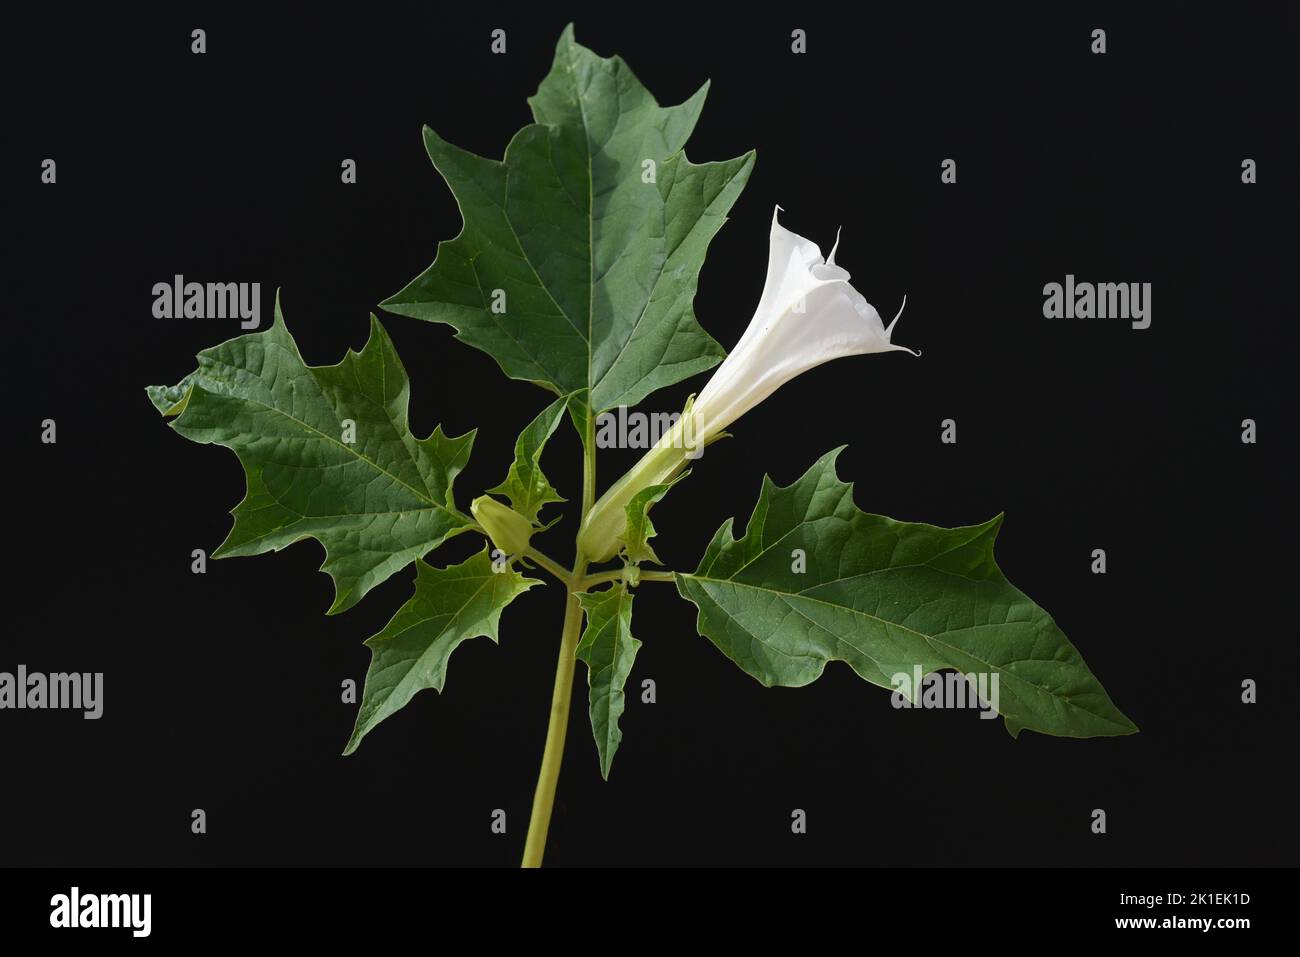 Thorn apple, Datura Stramonium is a medicinal plant that is also used in medicine. Stock Photo